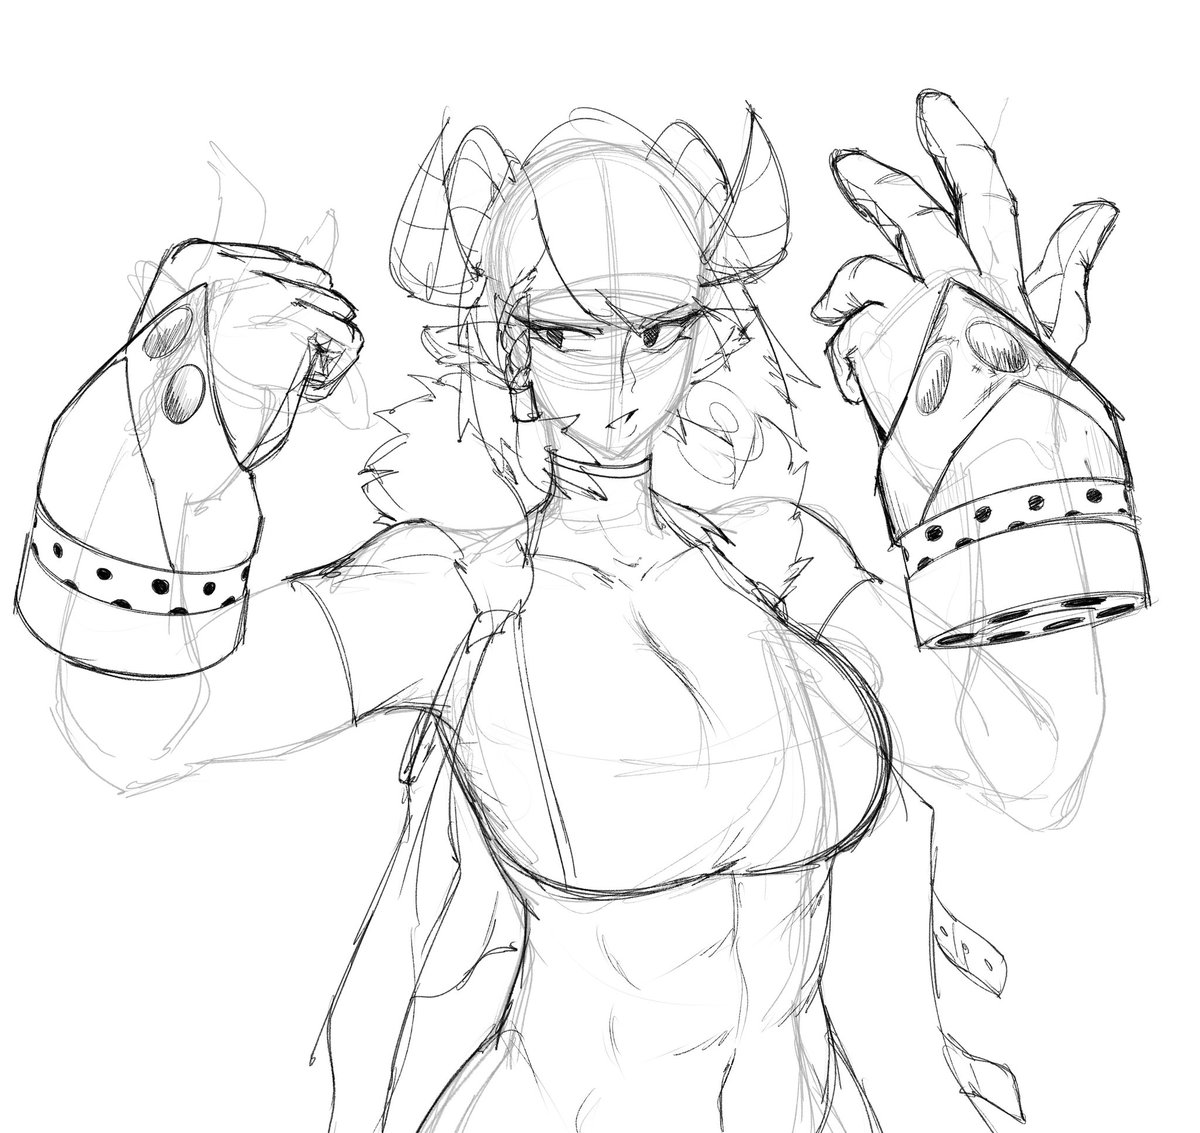 Ramela rework sketch, probably changing her whole get up and definitely updating her oven mitts 